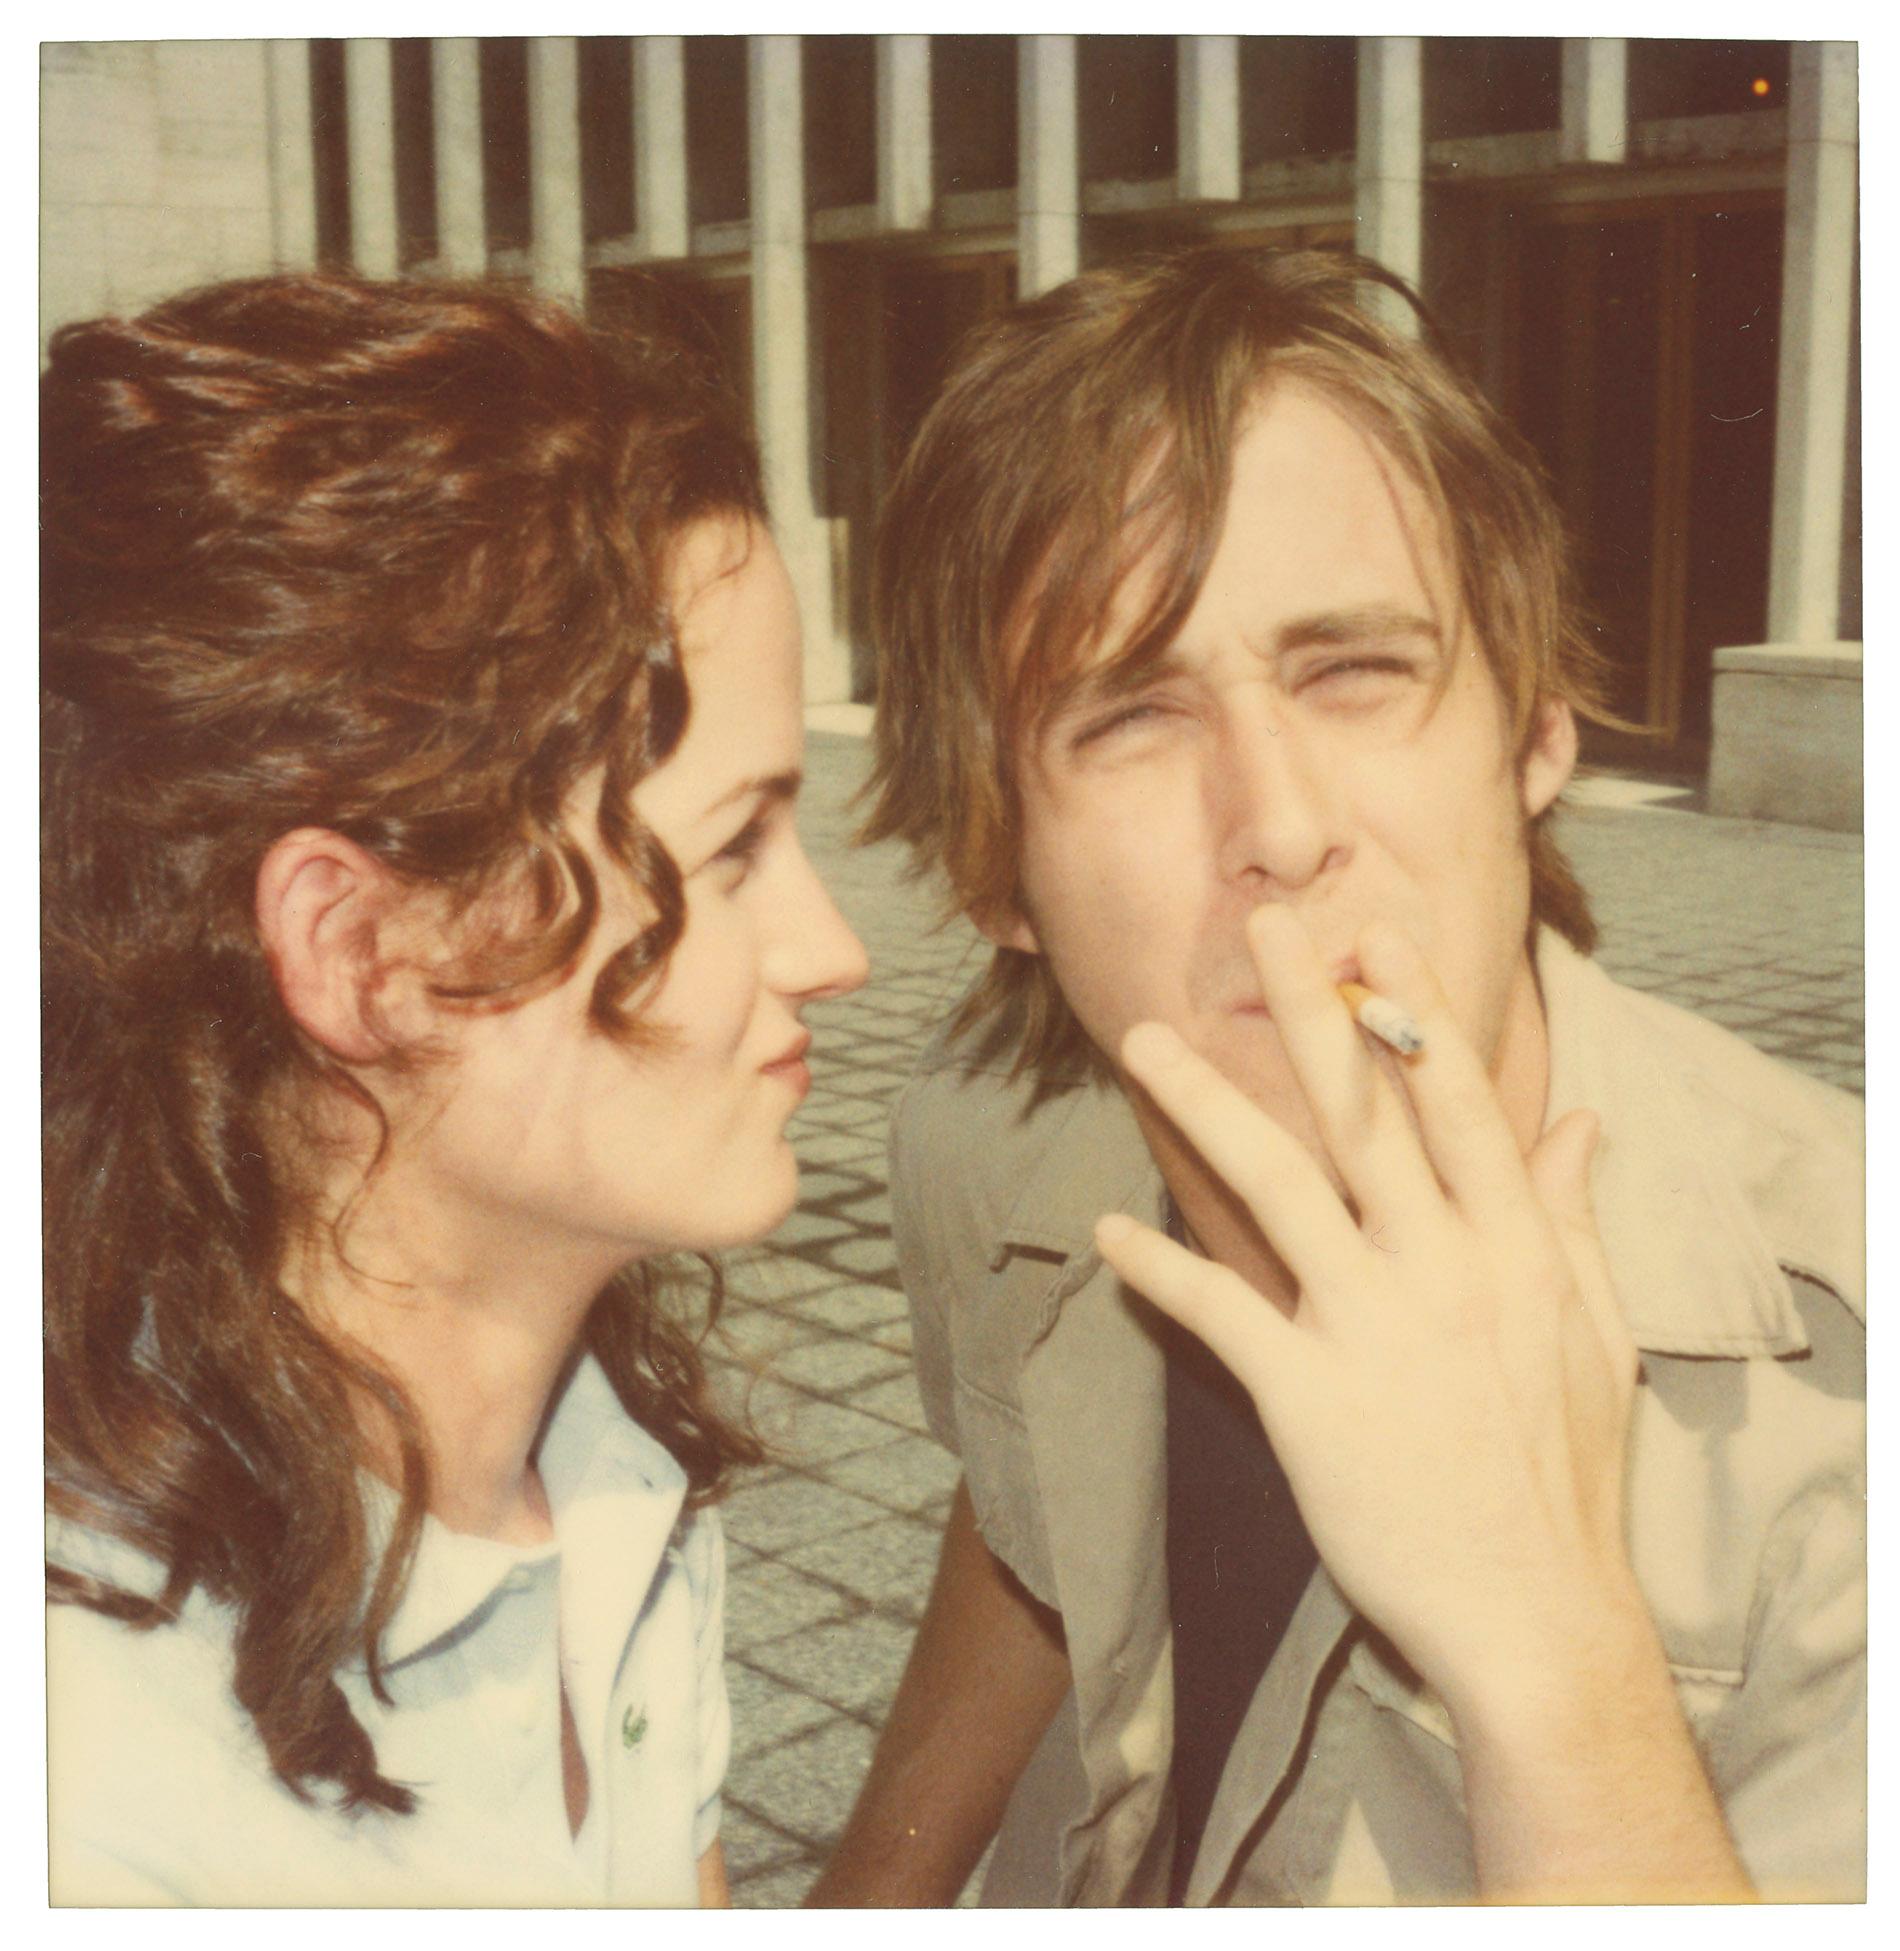 Stefanie Schneider Color Photograph - Athena and Henry (Stay) - with Ryan Gosling - 21st Century, Polaroid